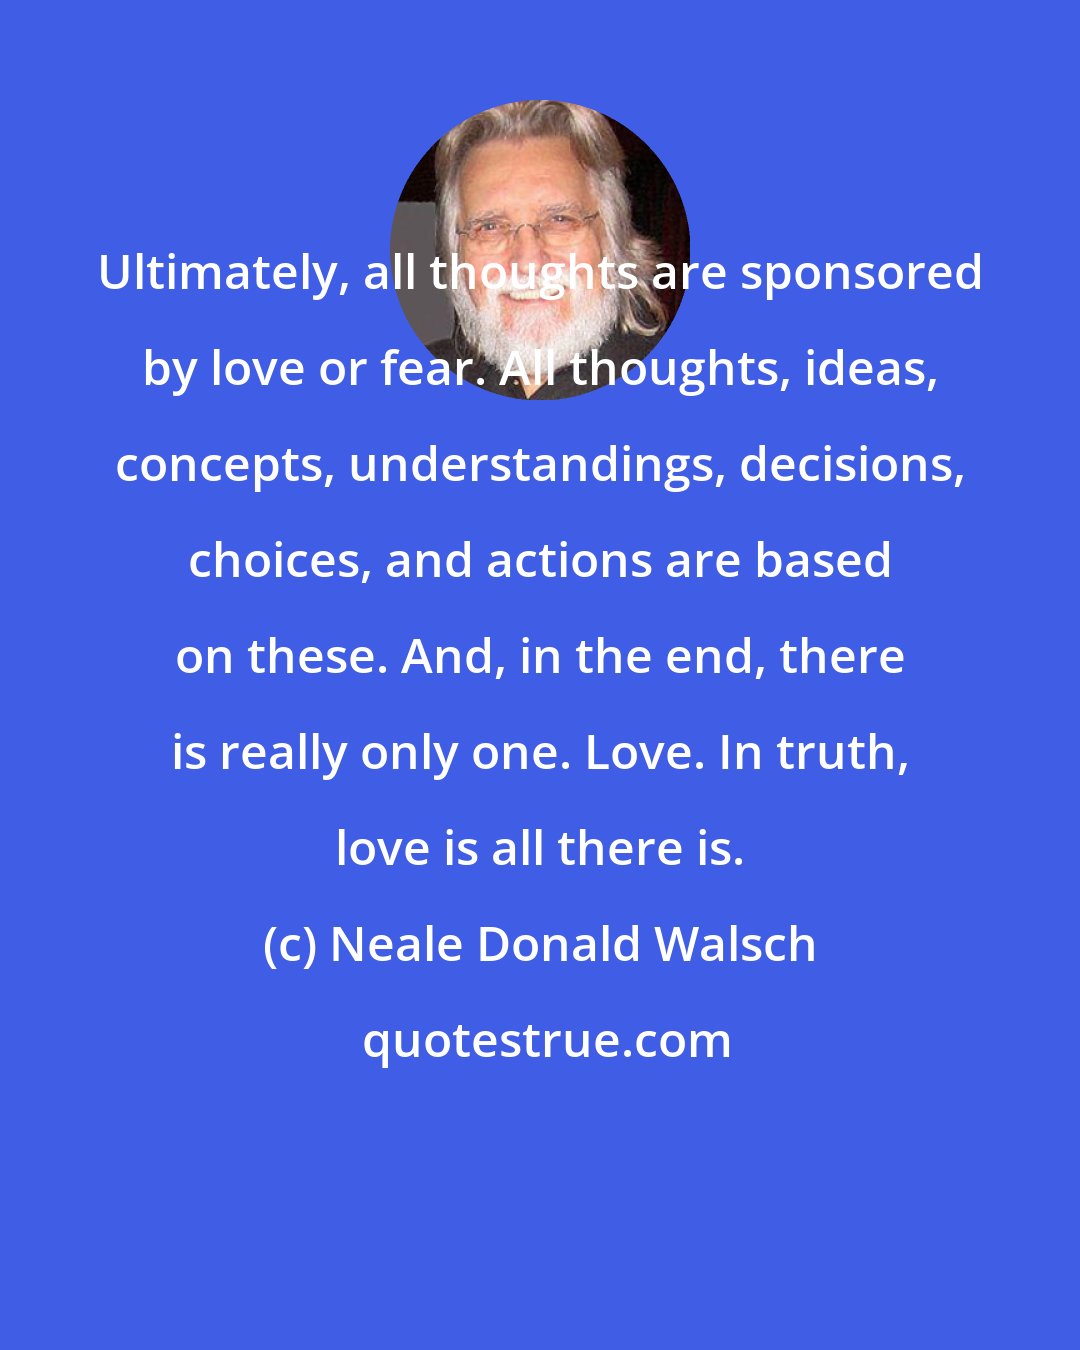 Neale Donald Walsch: Ultimately, all thoughts are sponsored by love or fear. All thoughts, ideas, concepts, understandings, decisions, choices, and actions are based on these. And, in the end, there is really only one. Love. In truth, love is all there is.